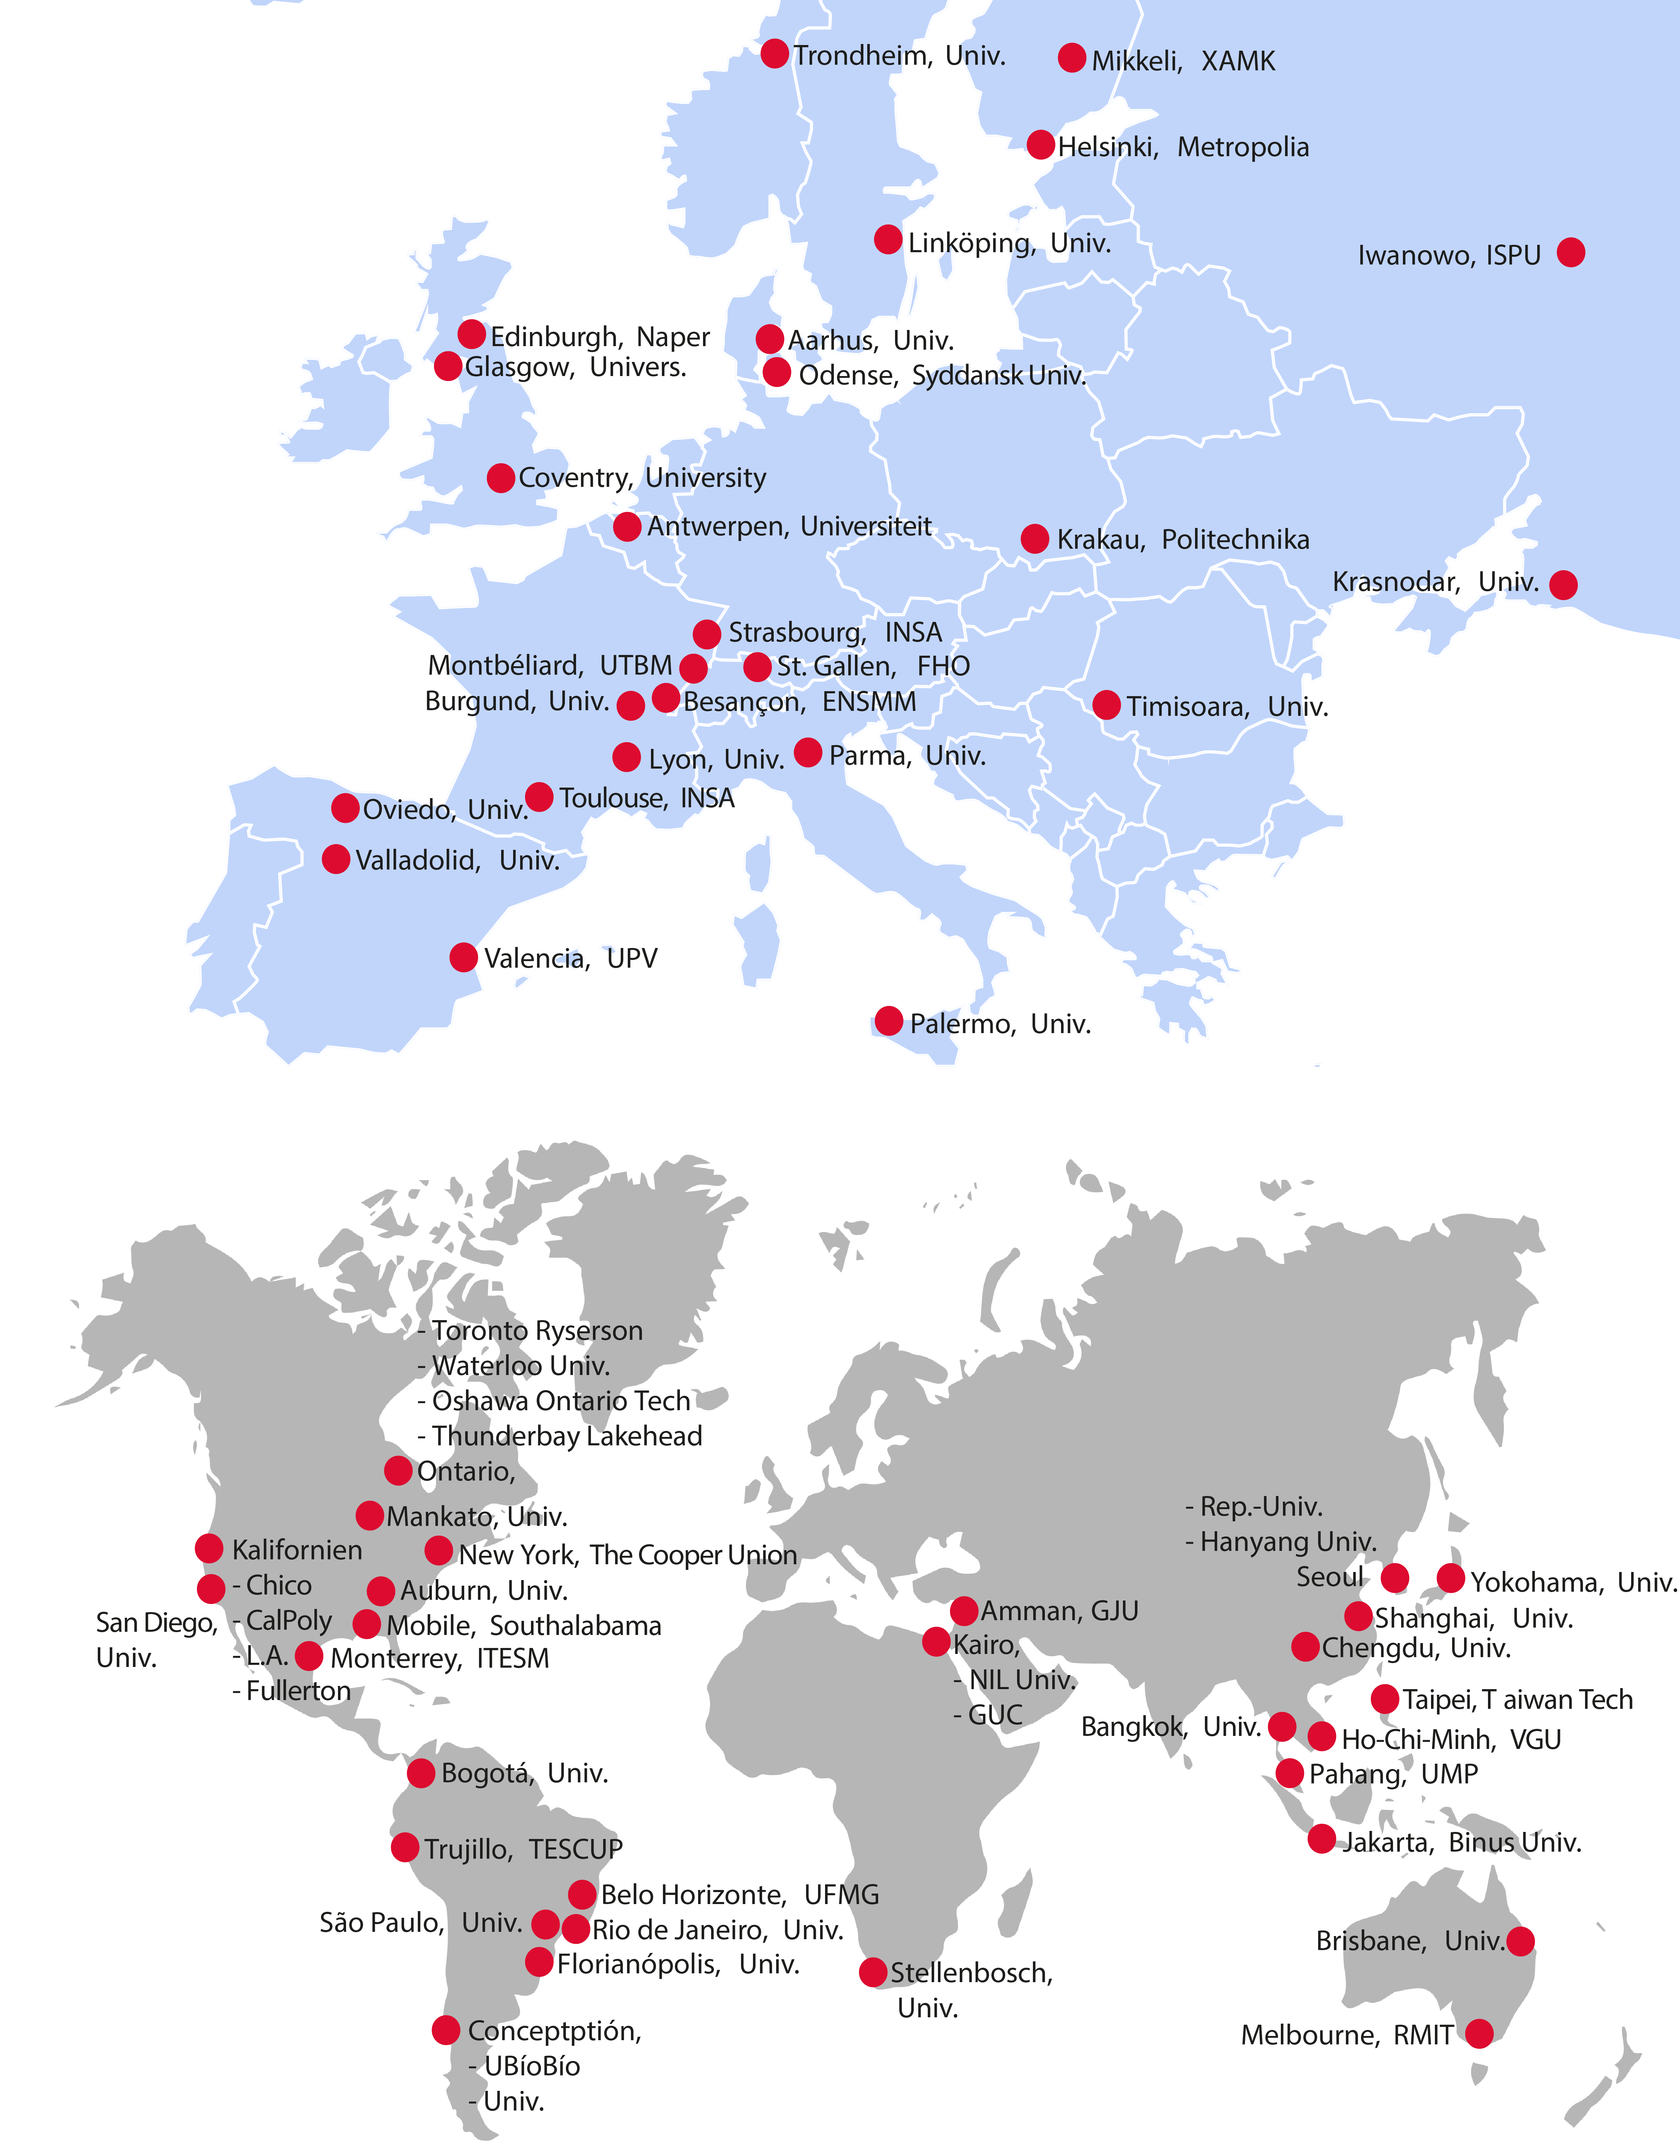 maps of Europe and of the world with locations of partner universities marked